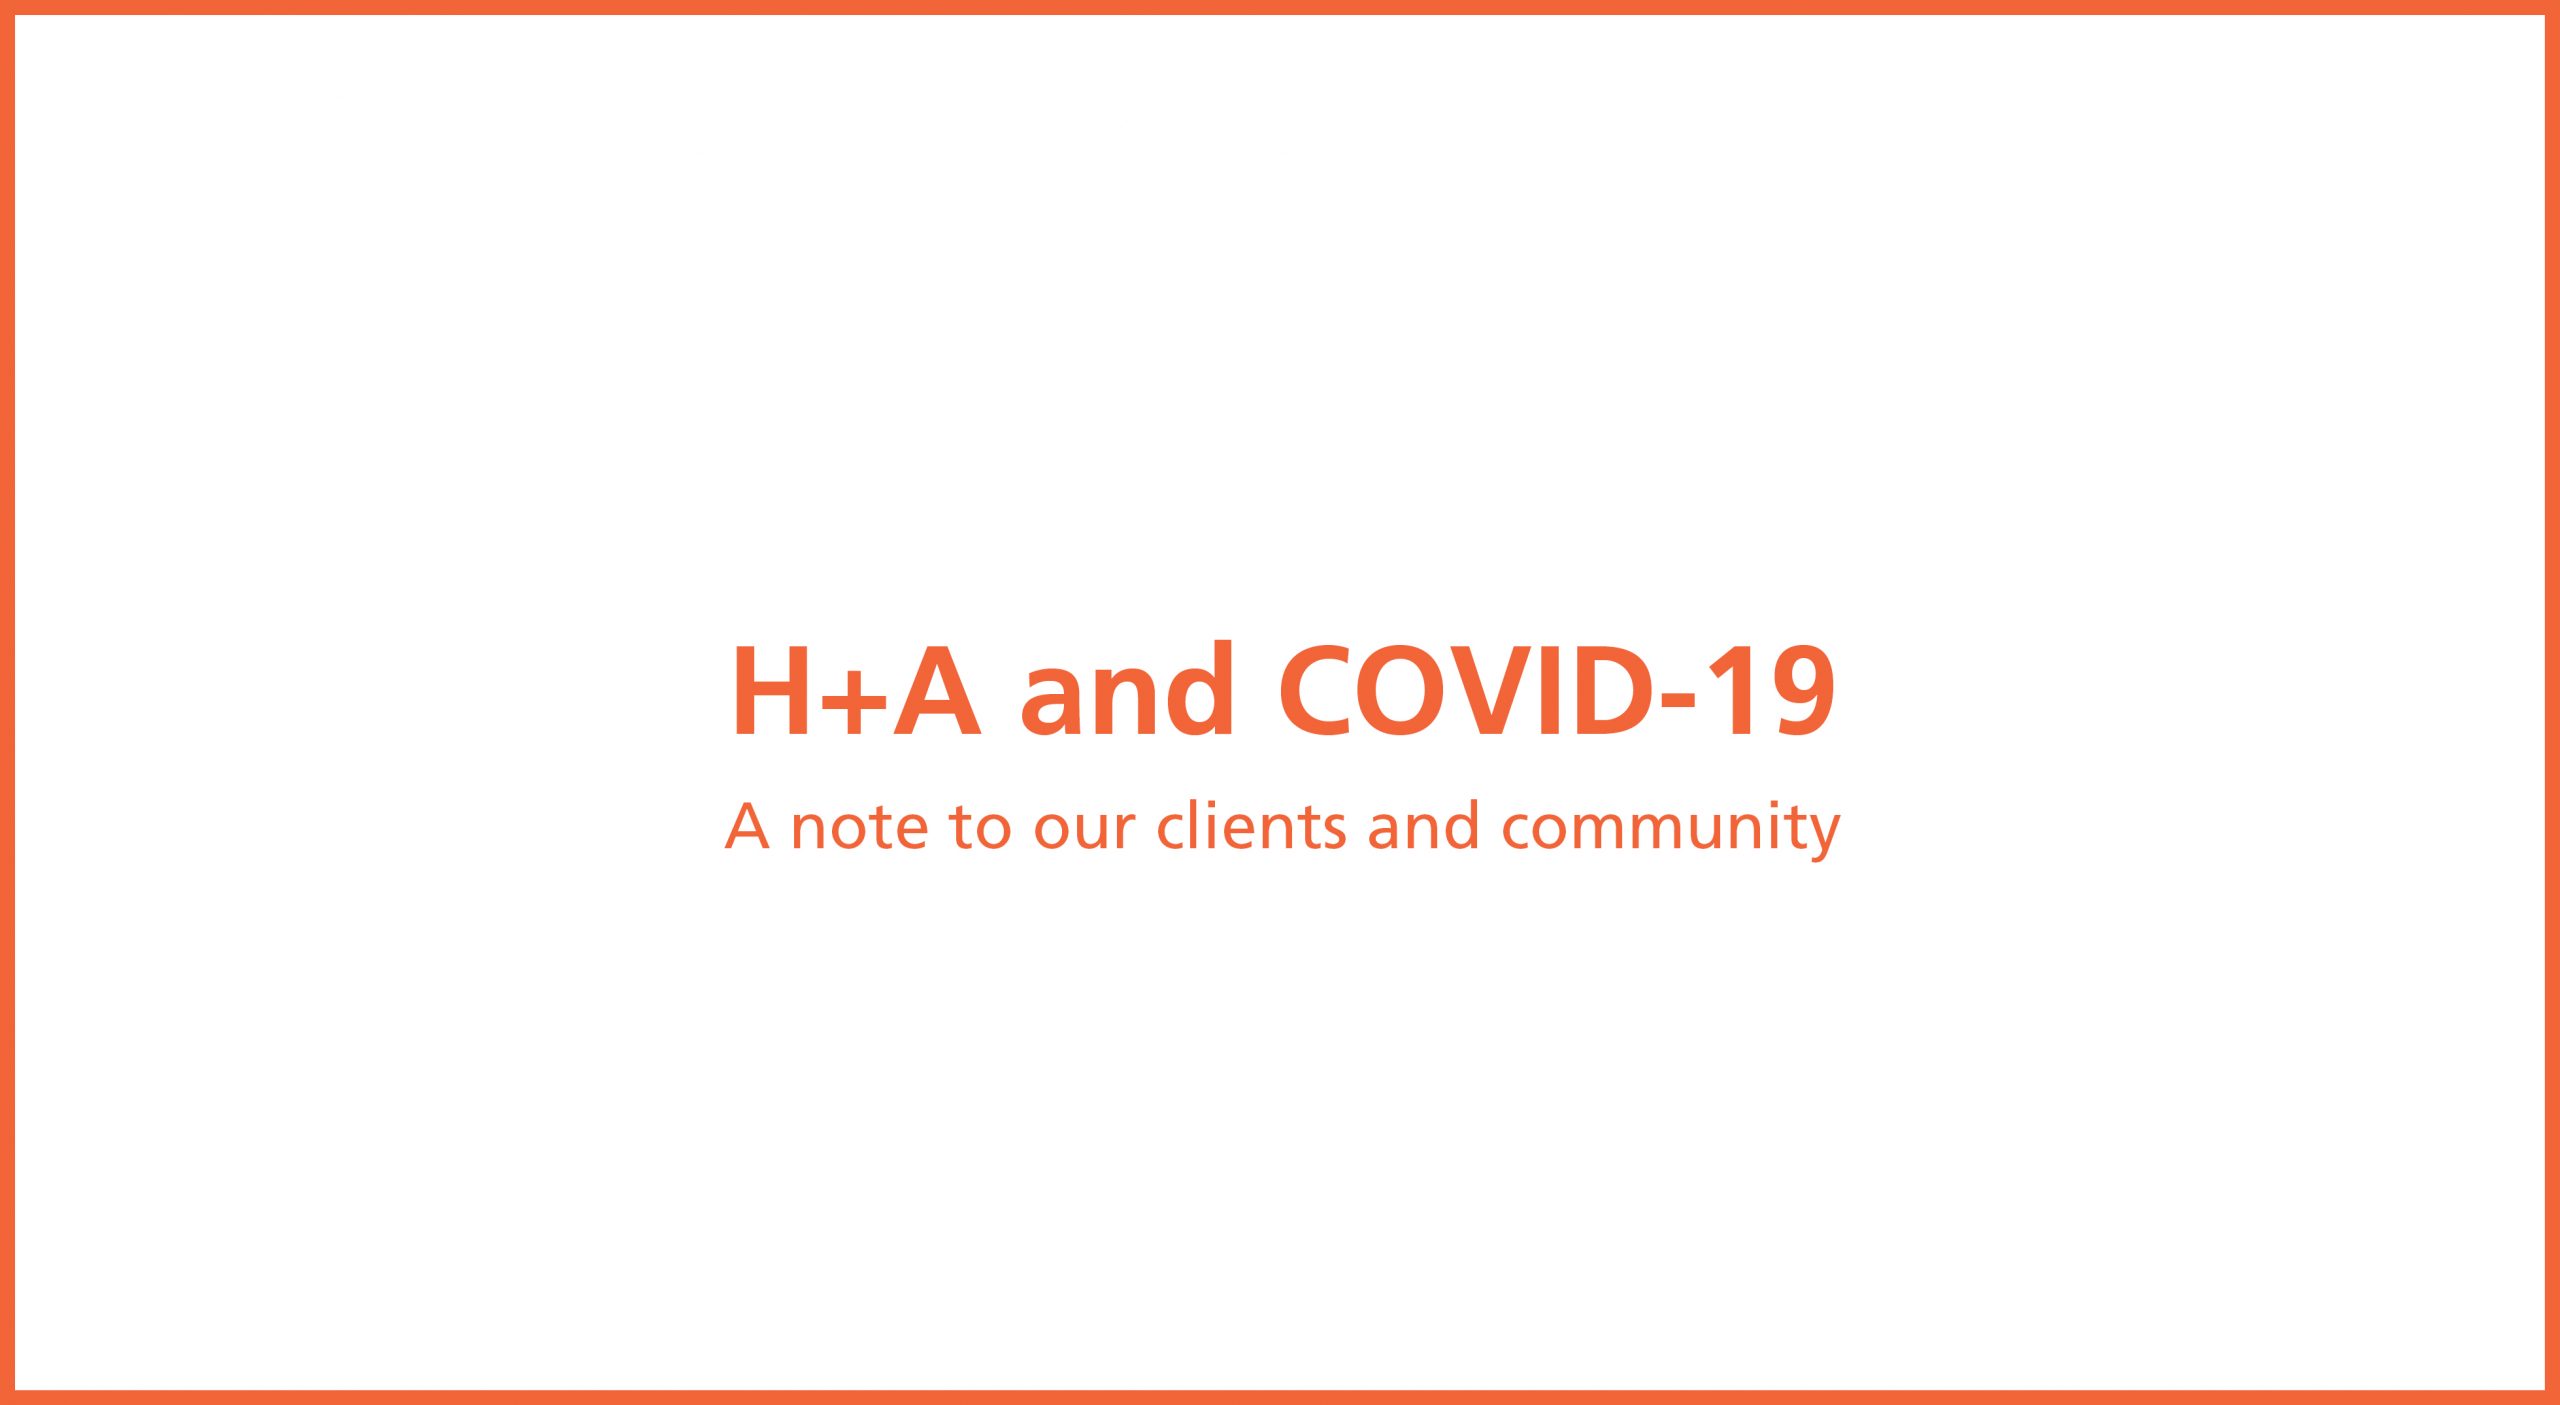 H+A and COVID-19: A Note To Our Clients and Community